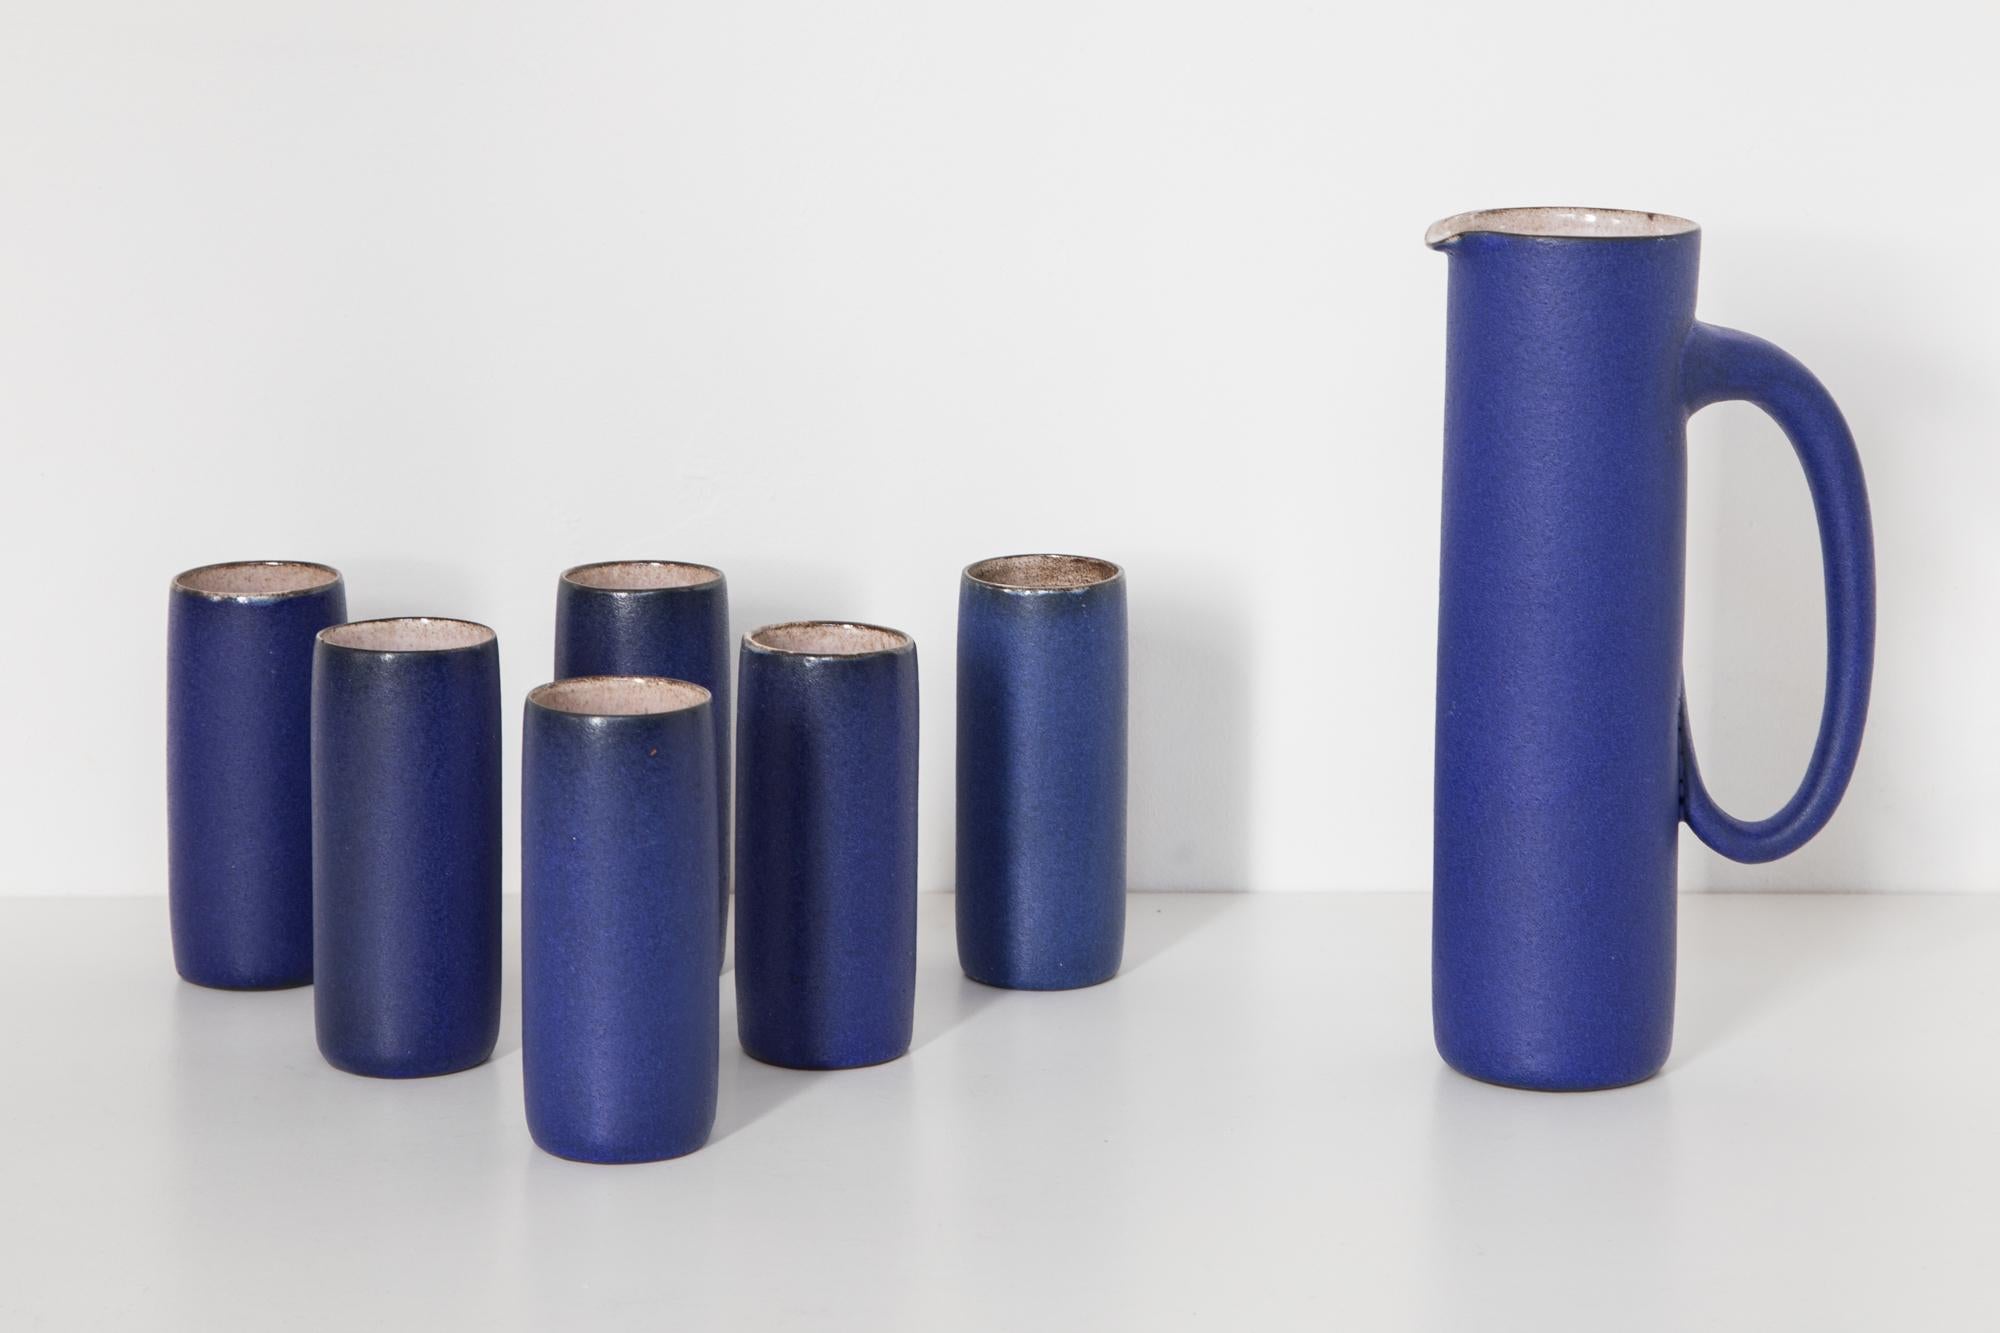 The tall six mugs and pitcher has an elegant Minimalist styling a narrow cylindrical neck and a narrow foot ring. The pitcher and mugs are glazed in a rich cobalt blue color with a matte finish. Perfect condition. Measures: Mugs 5 W x 13.5 H x 5 D